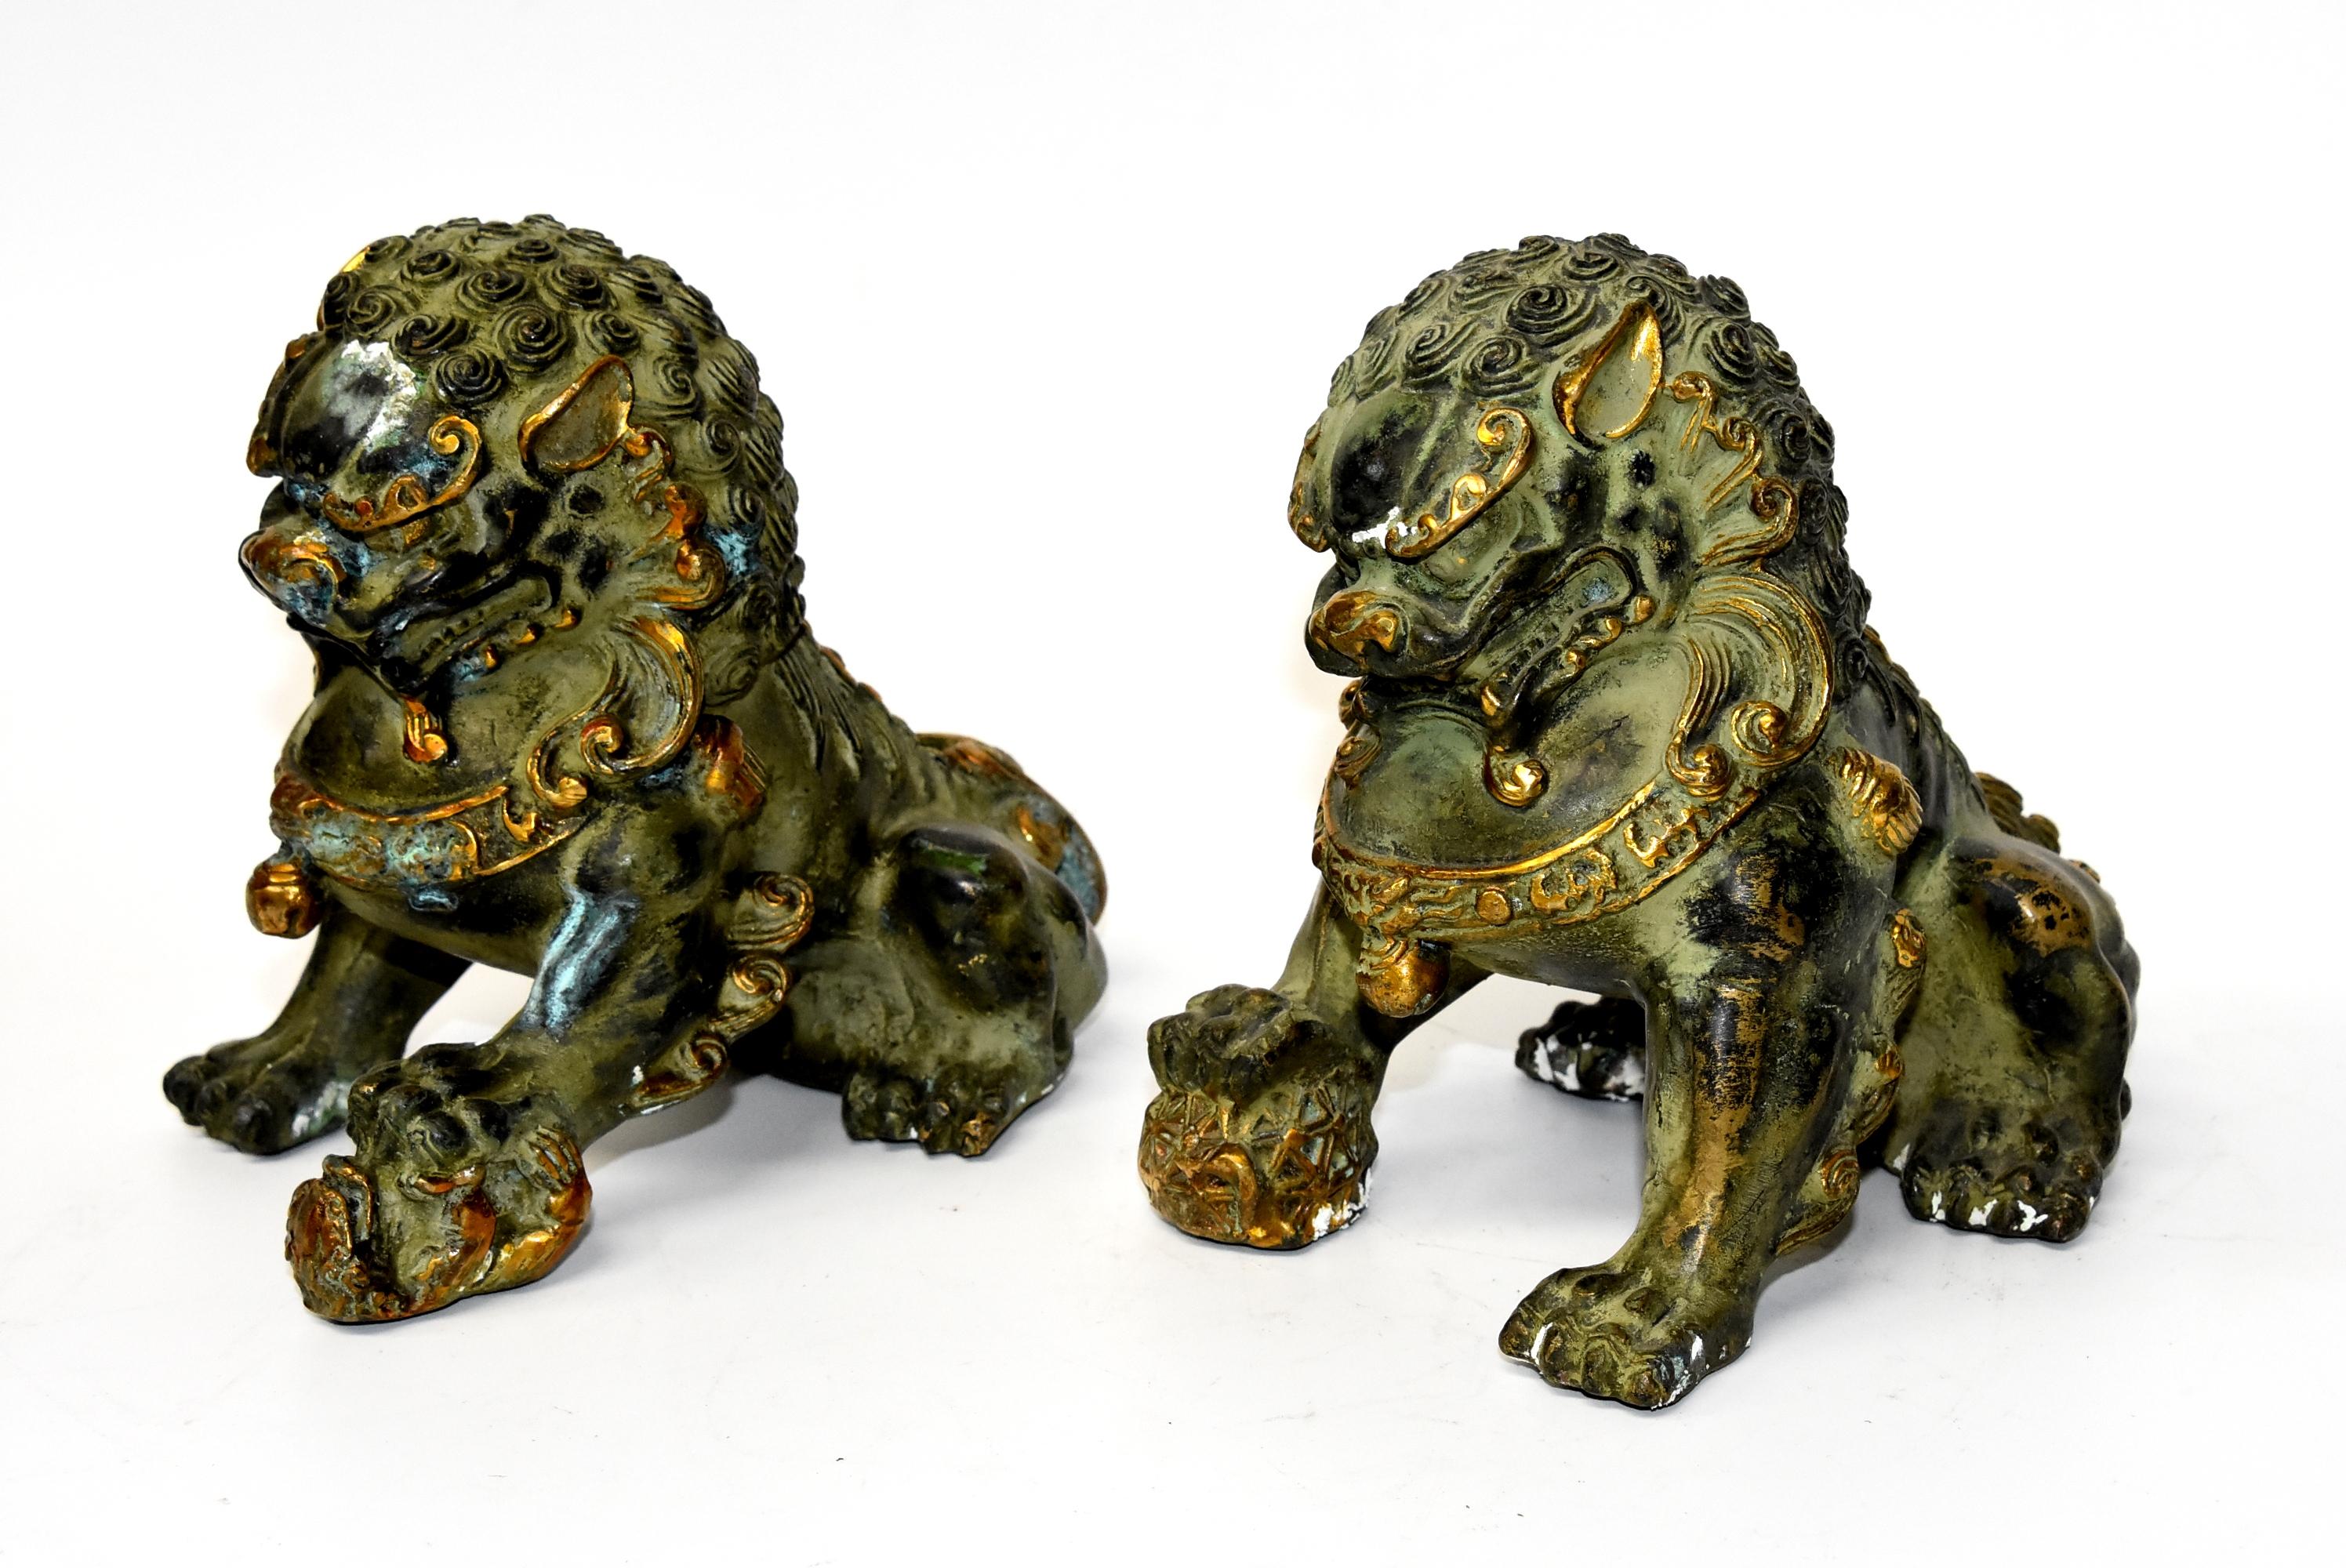 This is a pair of gilded bronze Chinese foo dogs. The male holds a globe firmly in his paw, symbolizing the universe, while the female holds a cub in hers, symbolizing family. The foo dogs' muscles are strong, their hair curly and beautiful, their